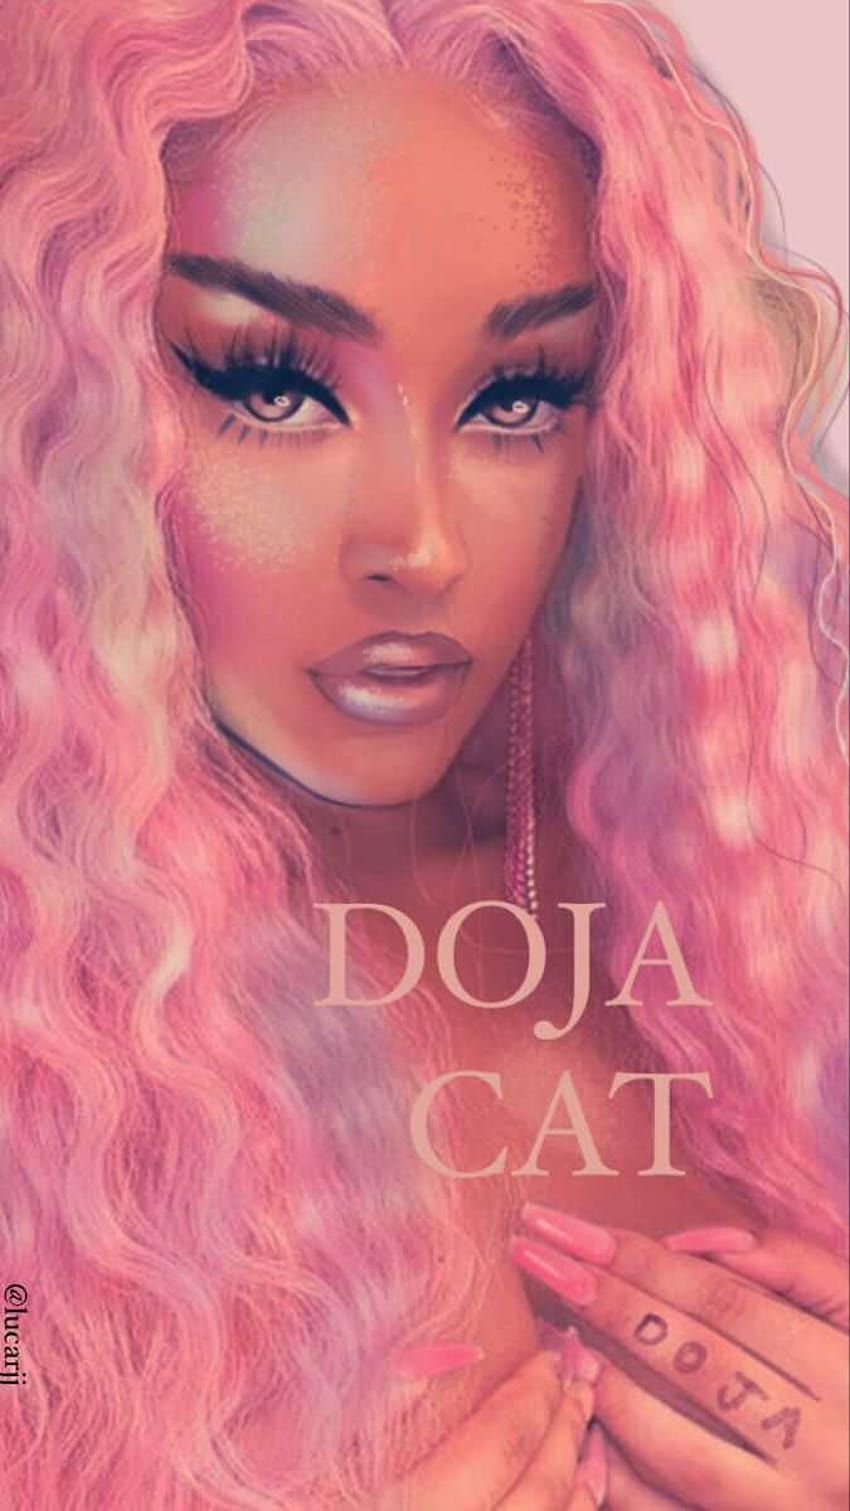 The cover of a book with pink hair and makeup - Doja Cat